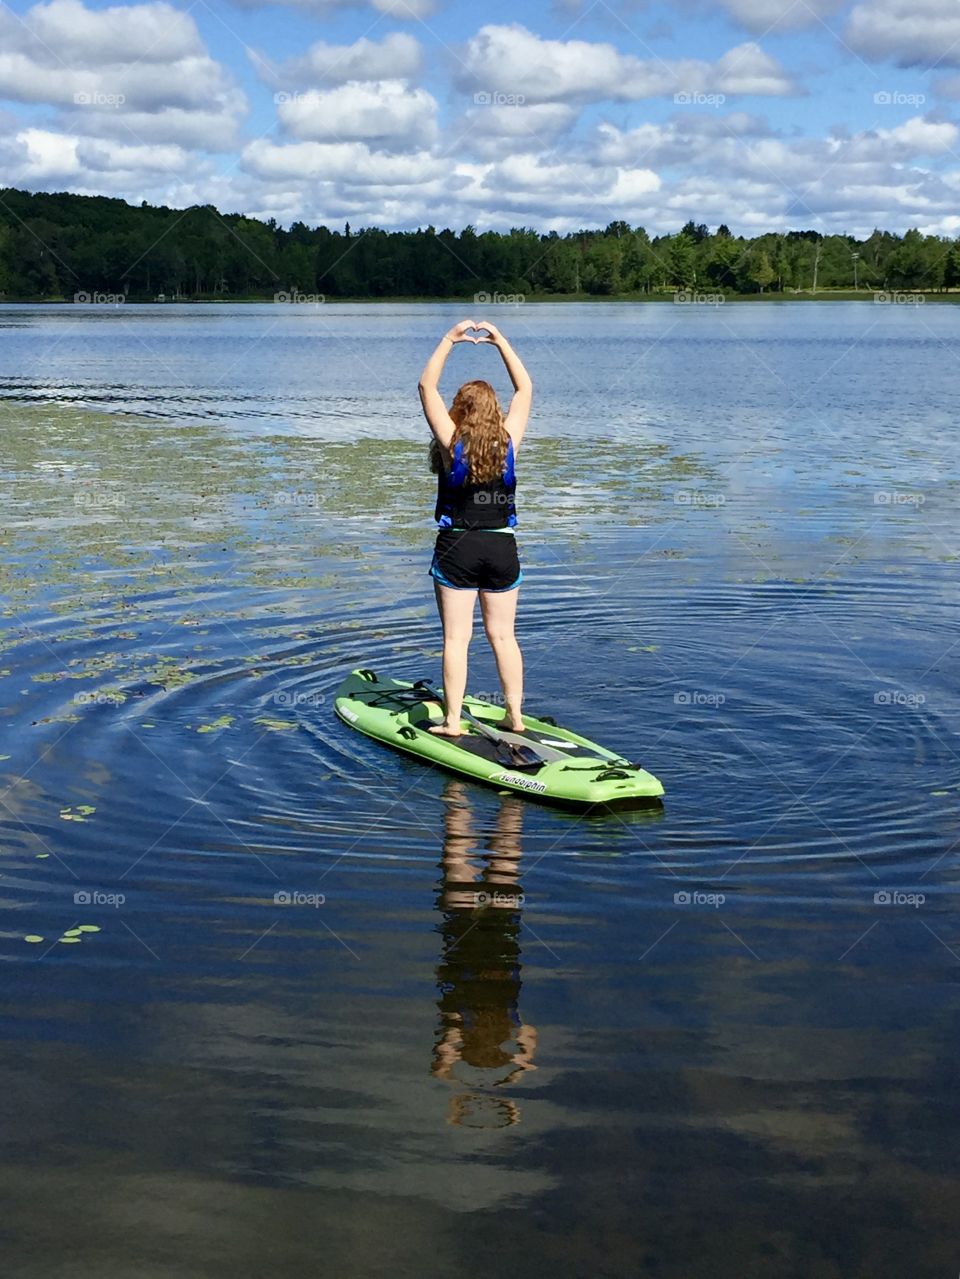 Girl standing on a green paddleboard in a lake with lily pads. She is wearing a blue lifejacket and her hands are up forming a heart above her head. Her reflection is visible in the lake water below.